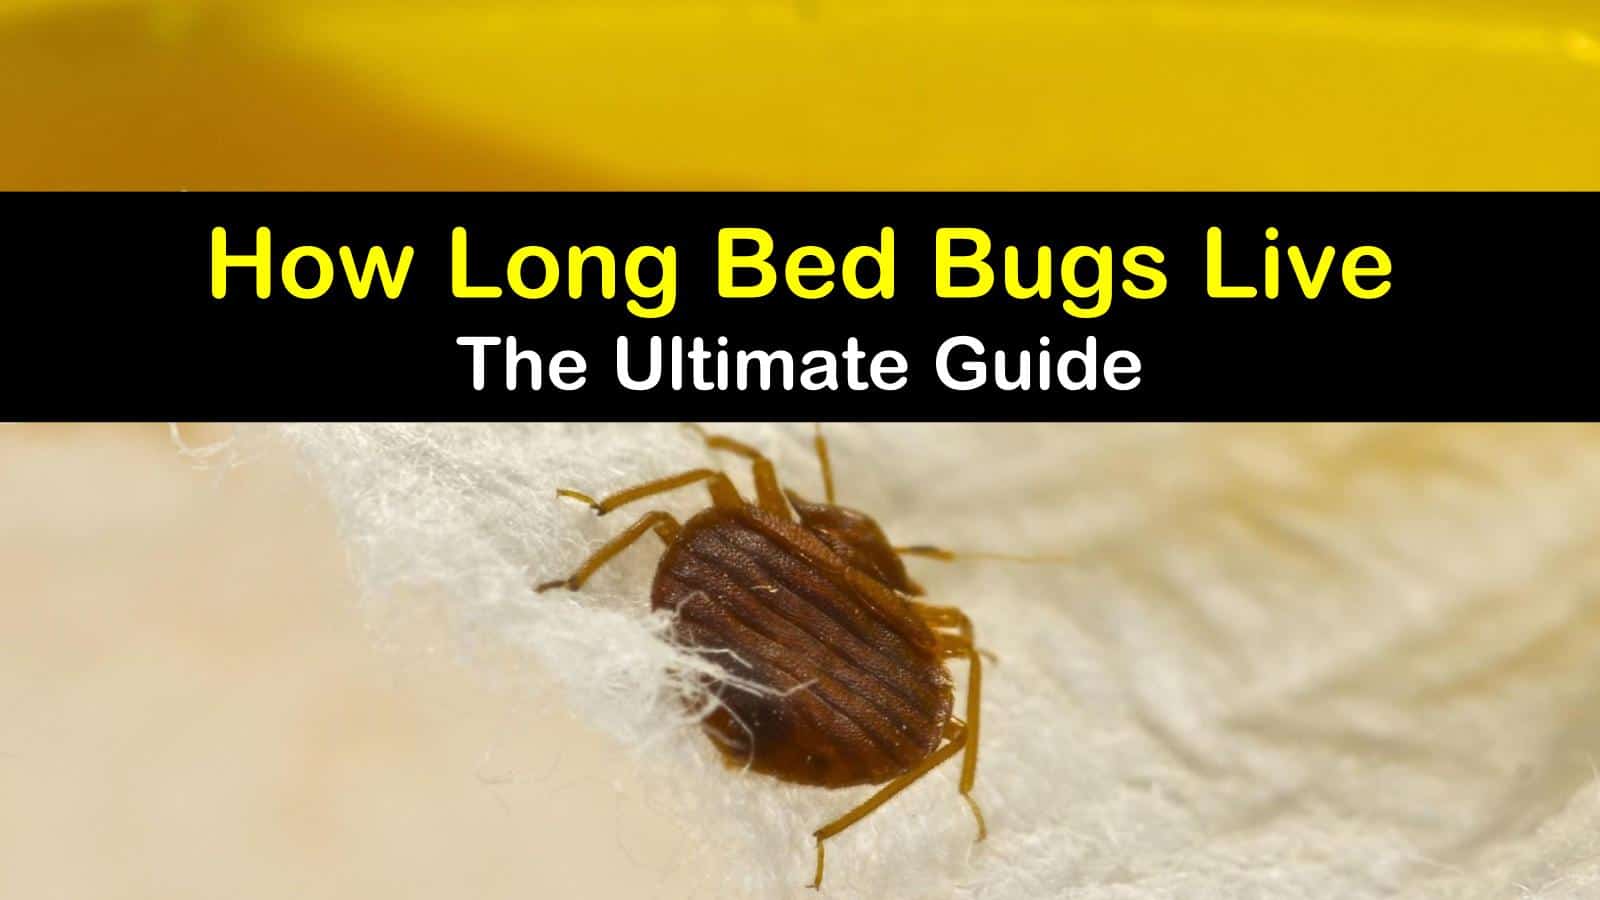 can bed bugs live in your air mattresses